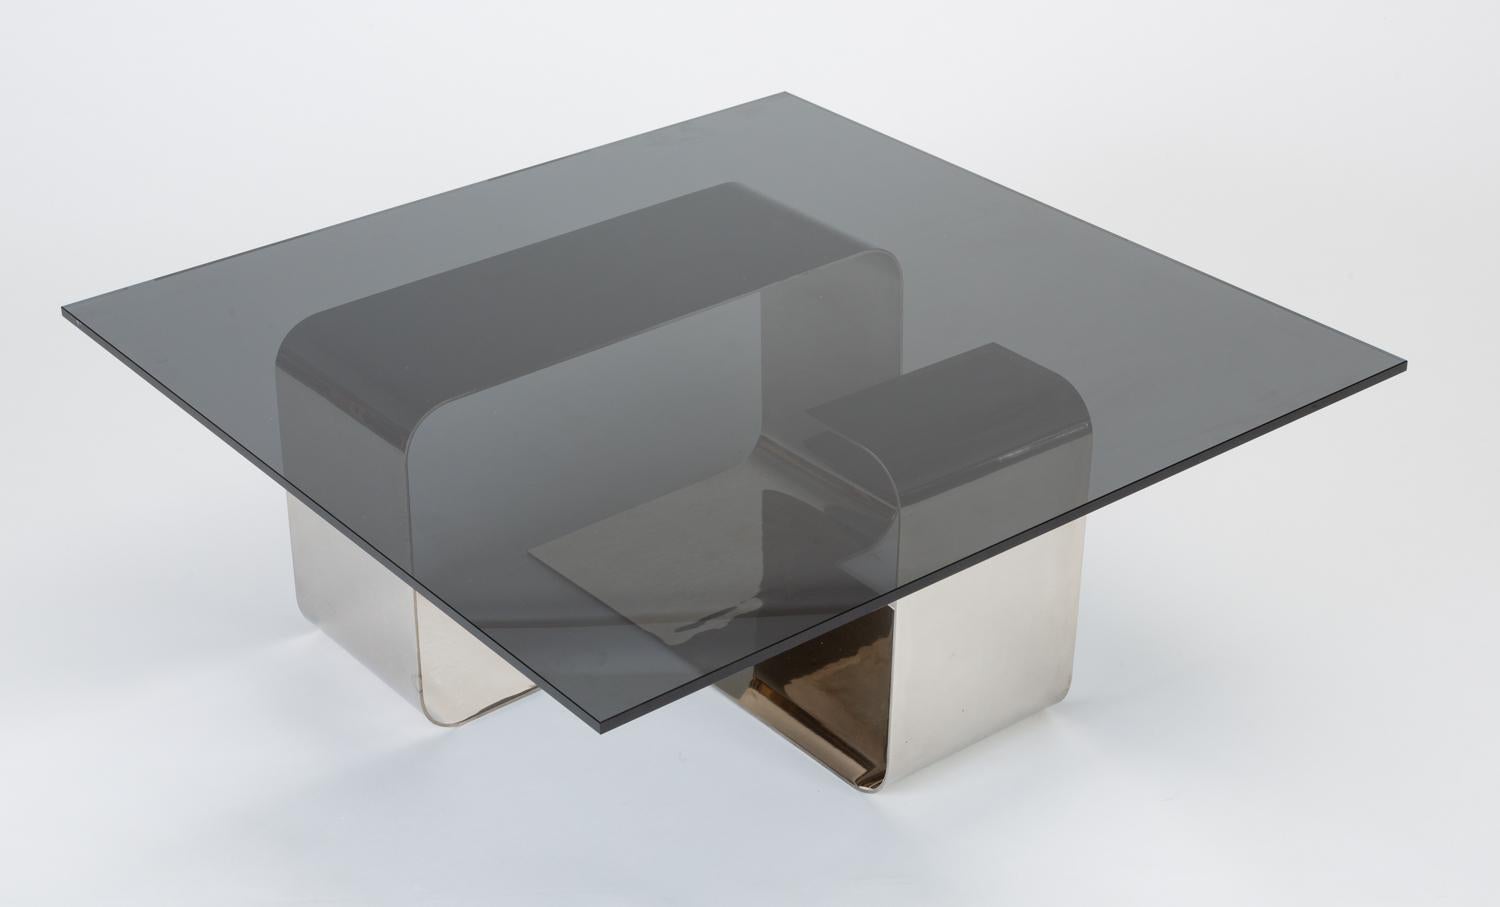 French Polished Steel and Smoked Glass Coffee Table by François Monnet for Kappa